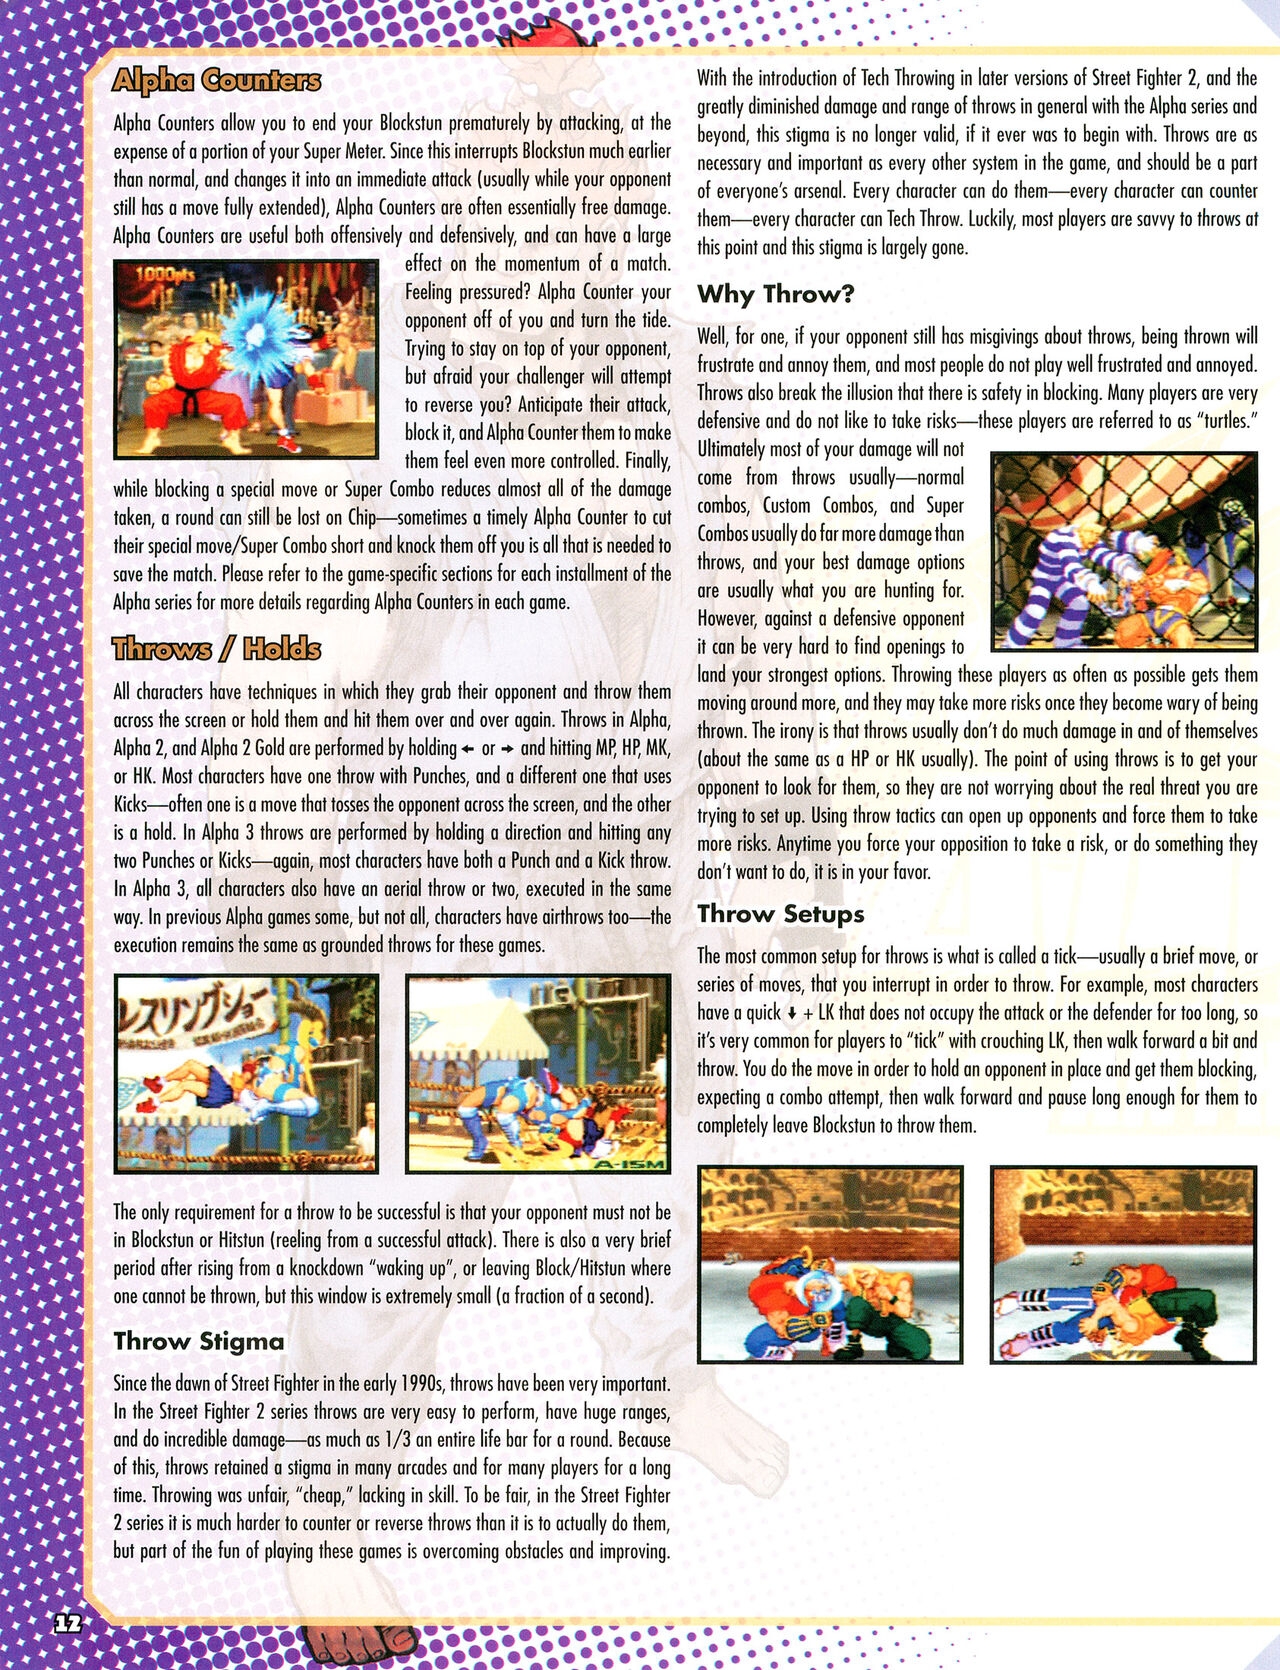 Street Fighter Alpha Anthology Strategy Guide 13